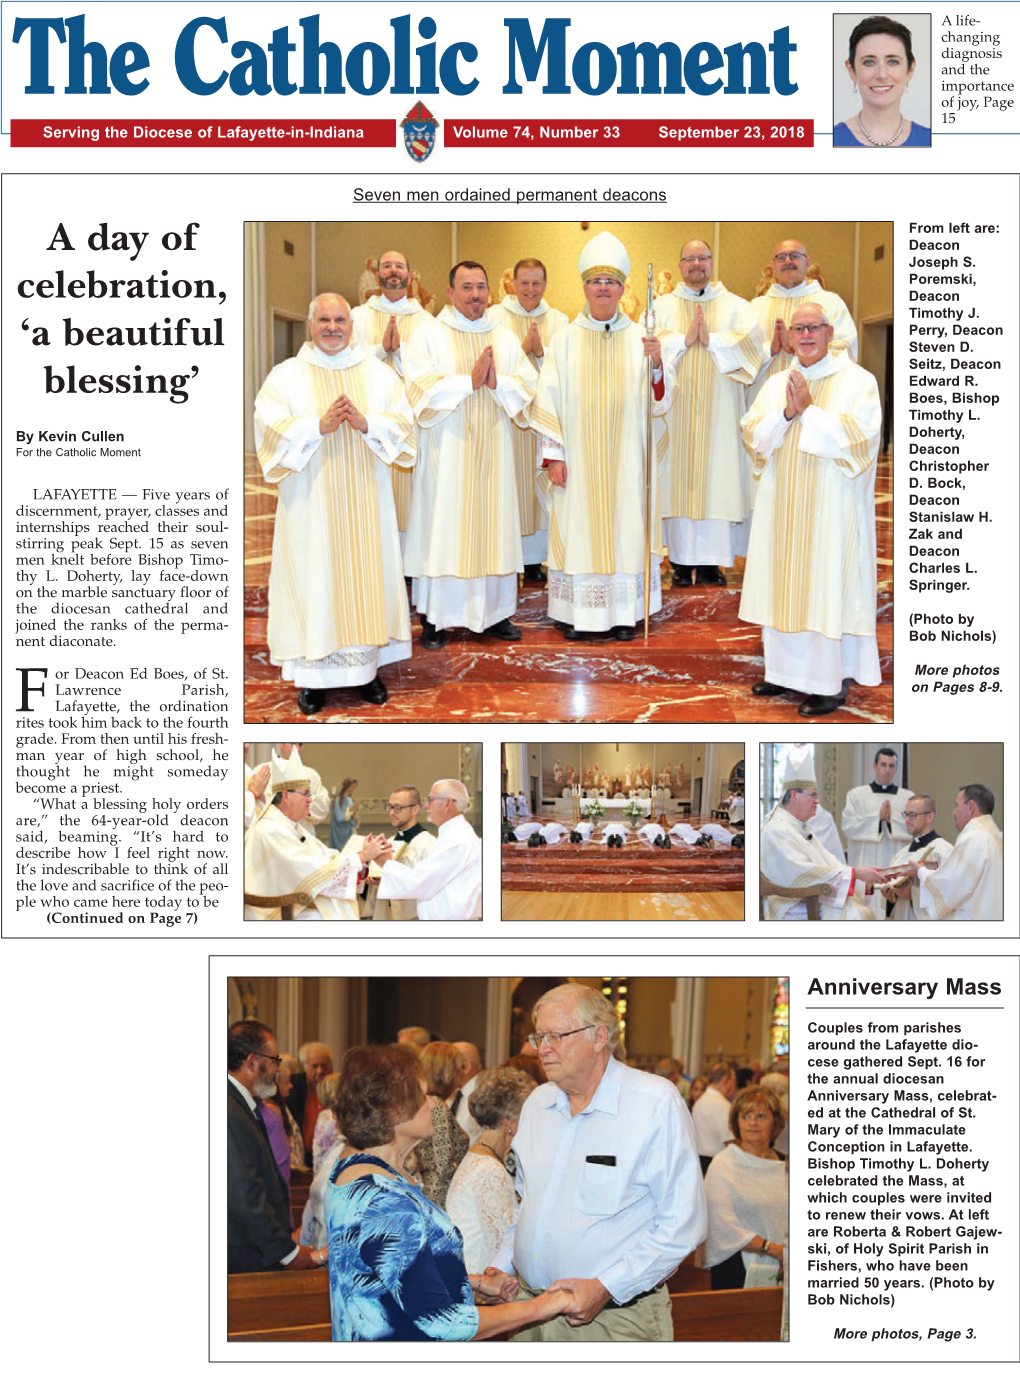 A Day of Celebration, 'A Beautiful Blessing'